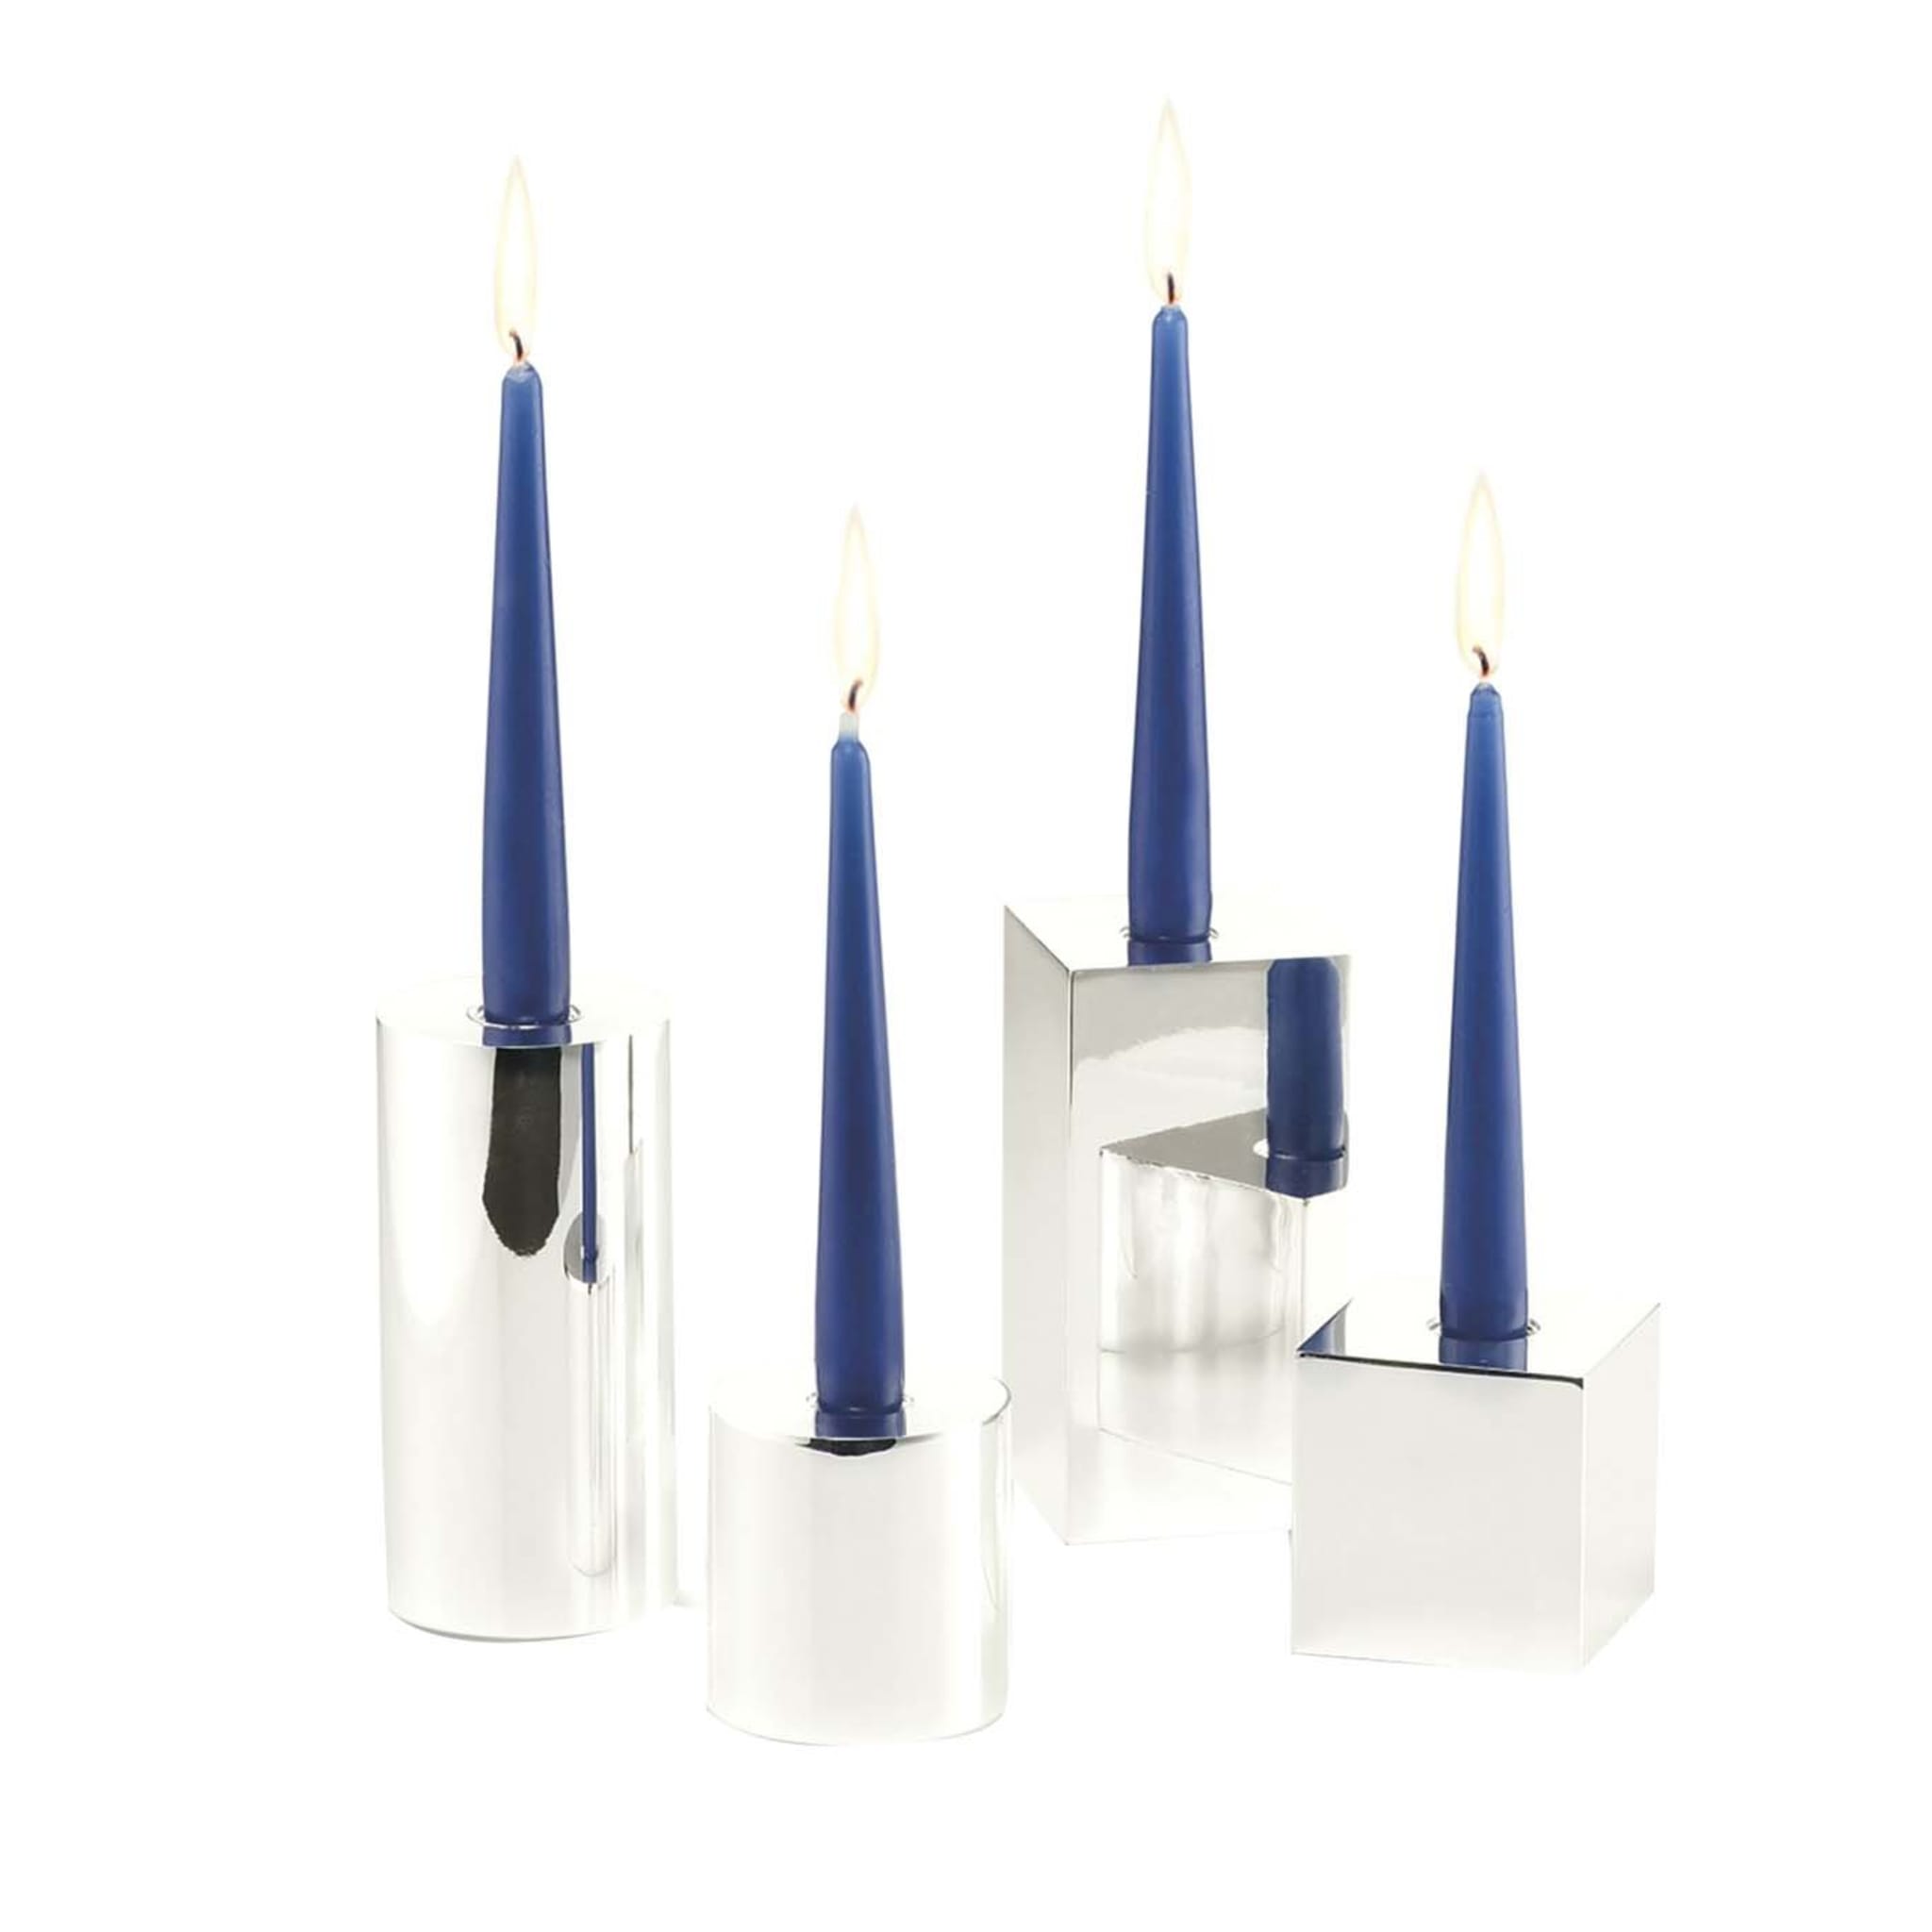 Insitam Set of 4 Candlesticks by Giulio Cappellini - Main view